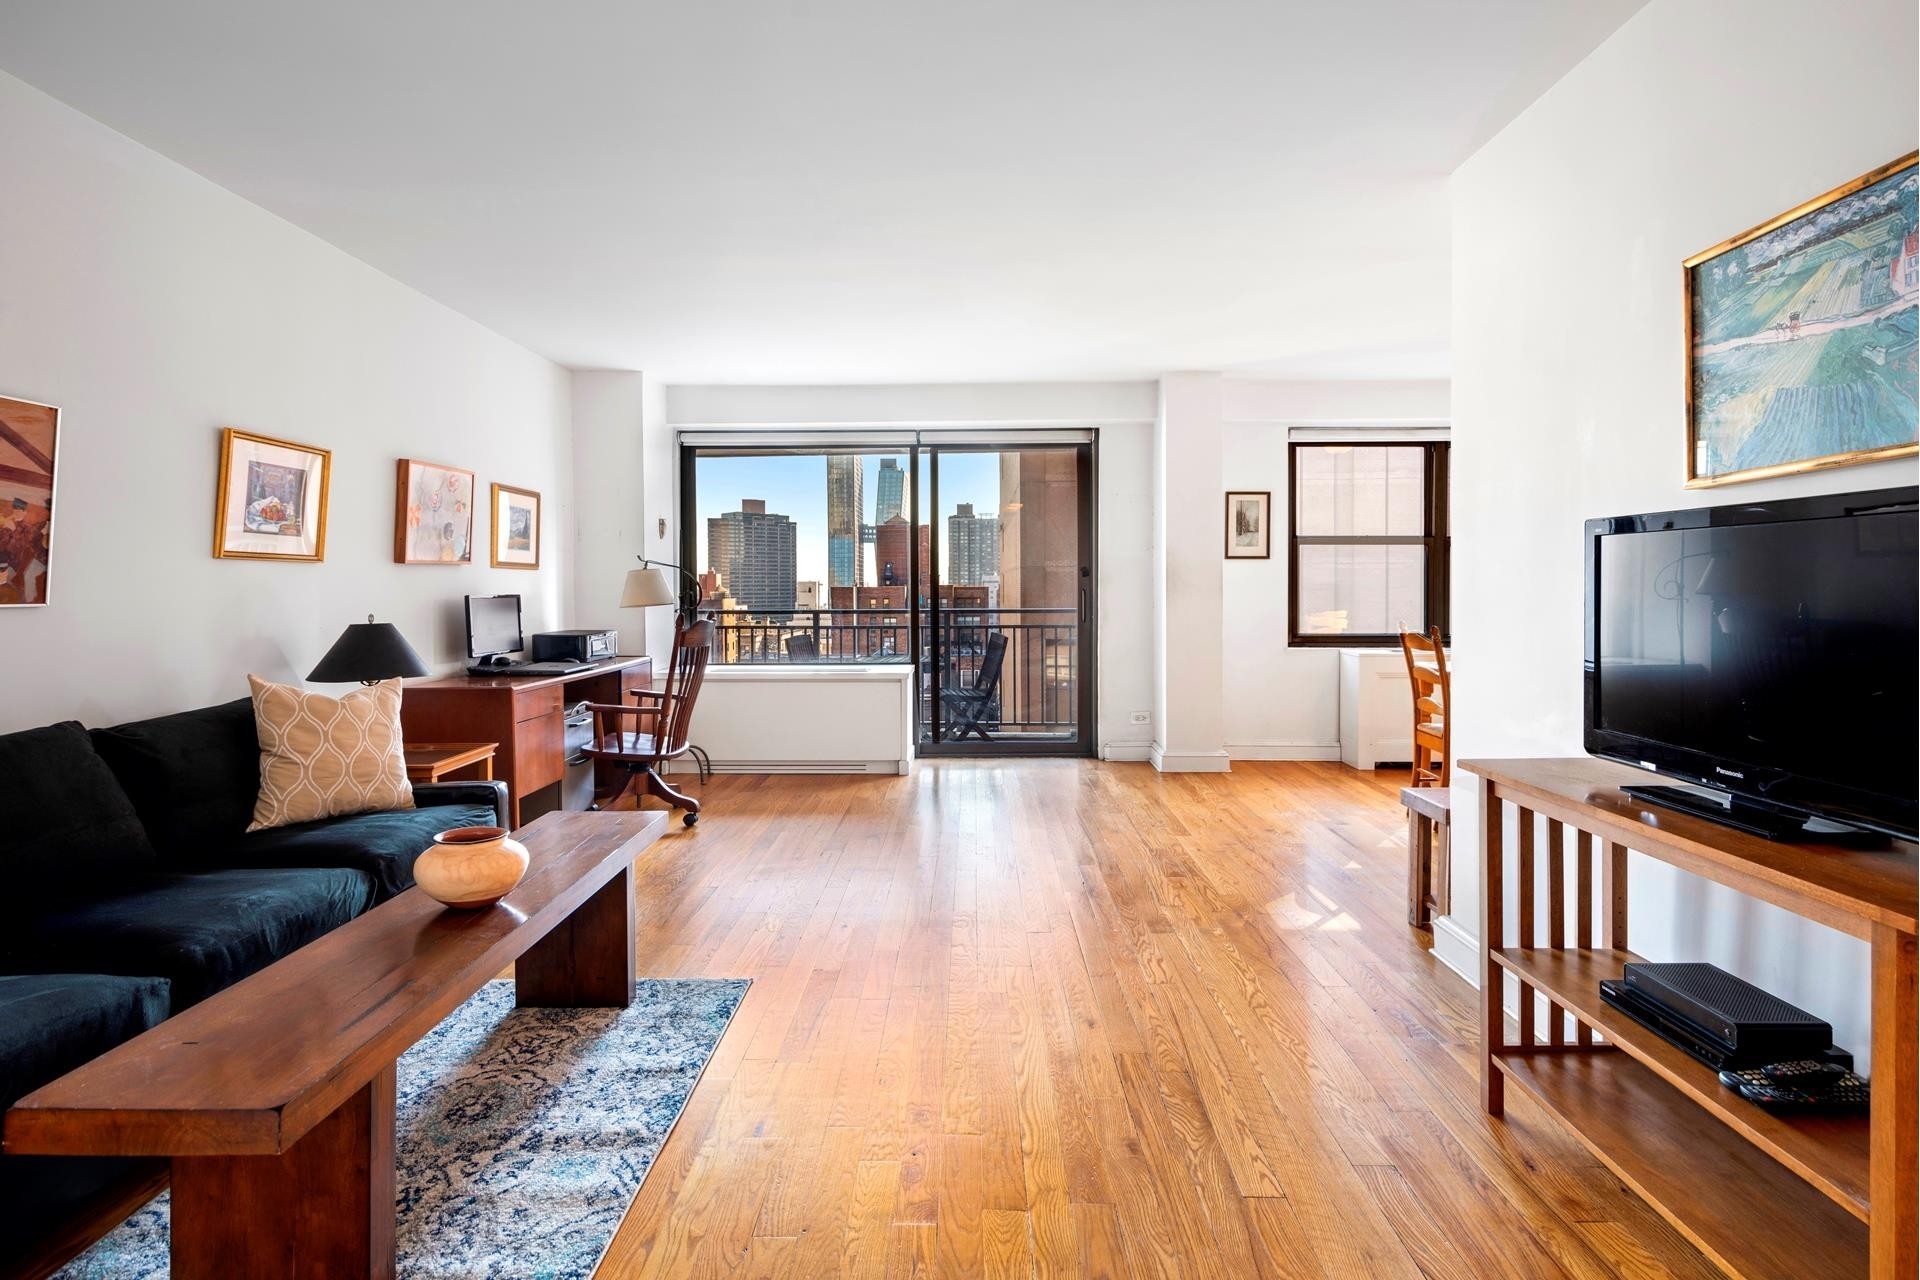 Co-op Properties for Sale at Murray Hill House, 132 E 35TH ST, 13E Murray Hill, New York, New York 10016